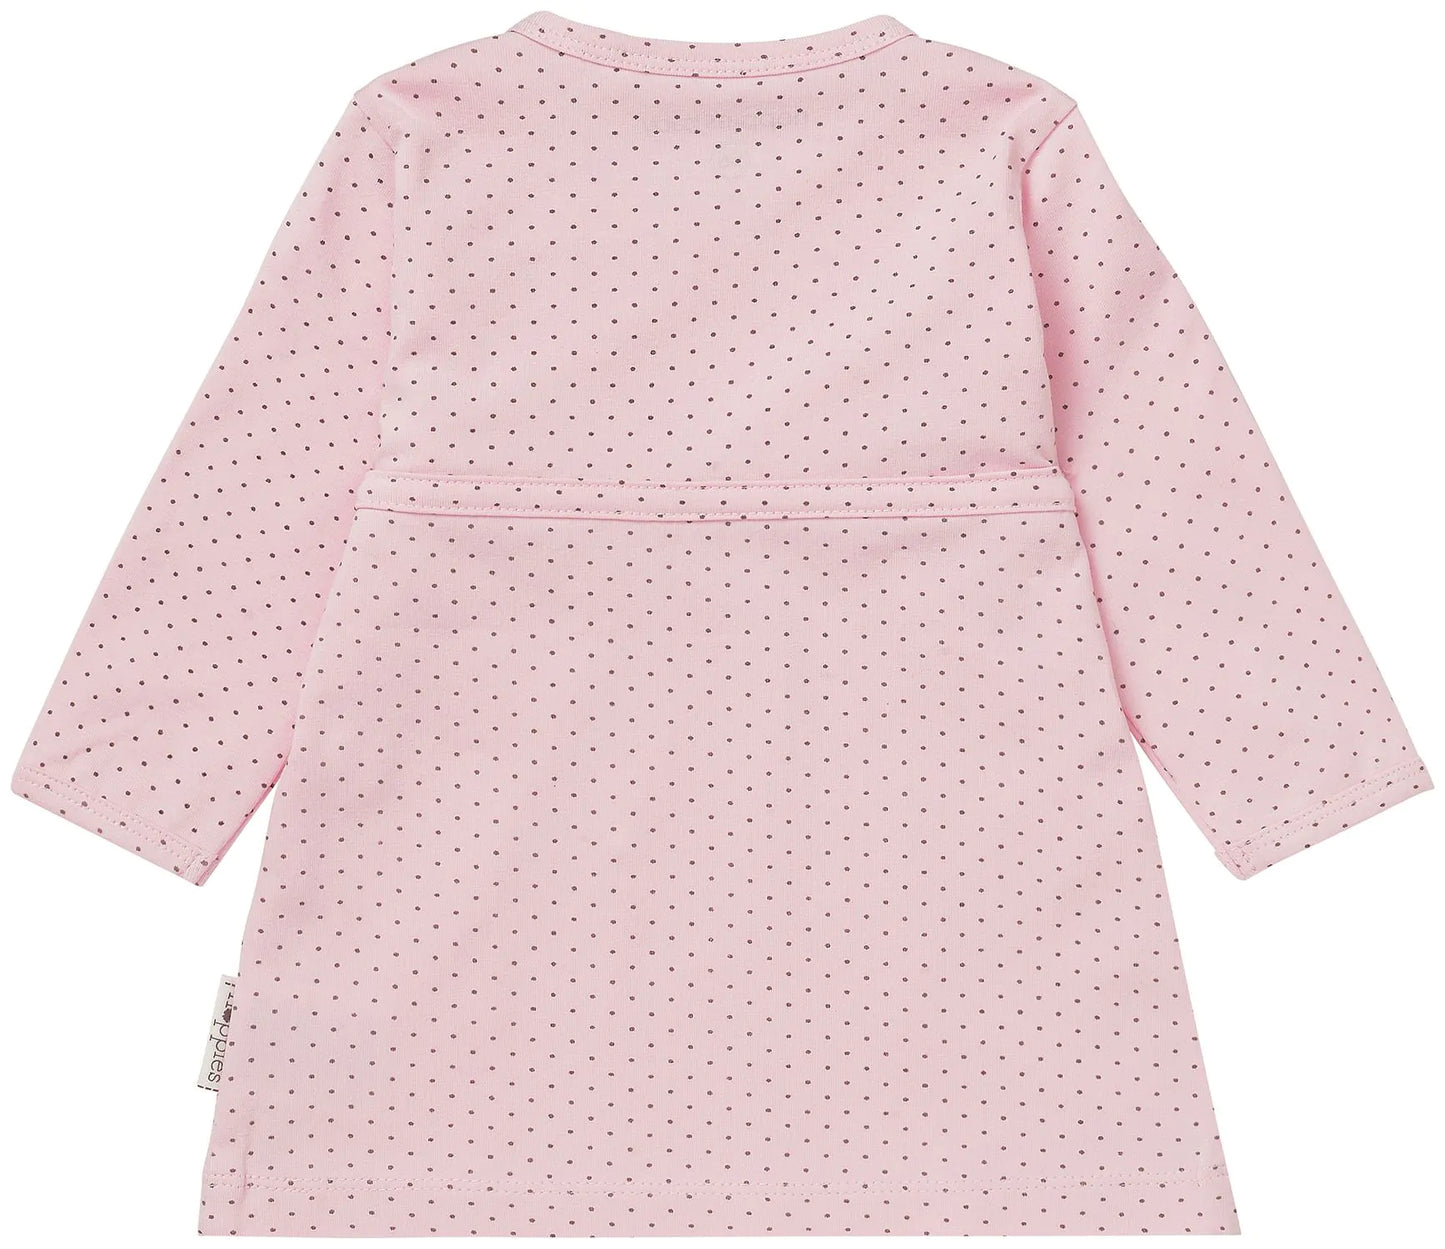 Get trendy with T-shirt Rose Clair - Noppies - Vêtement bébé available at BABY PREMA. Grab yours for €7.95 today!